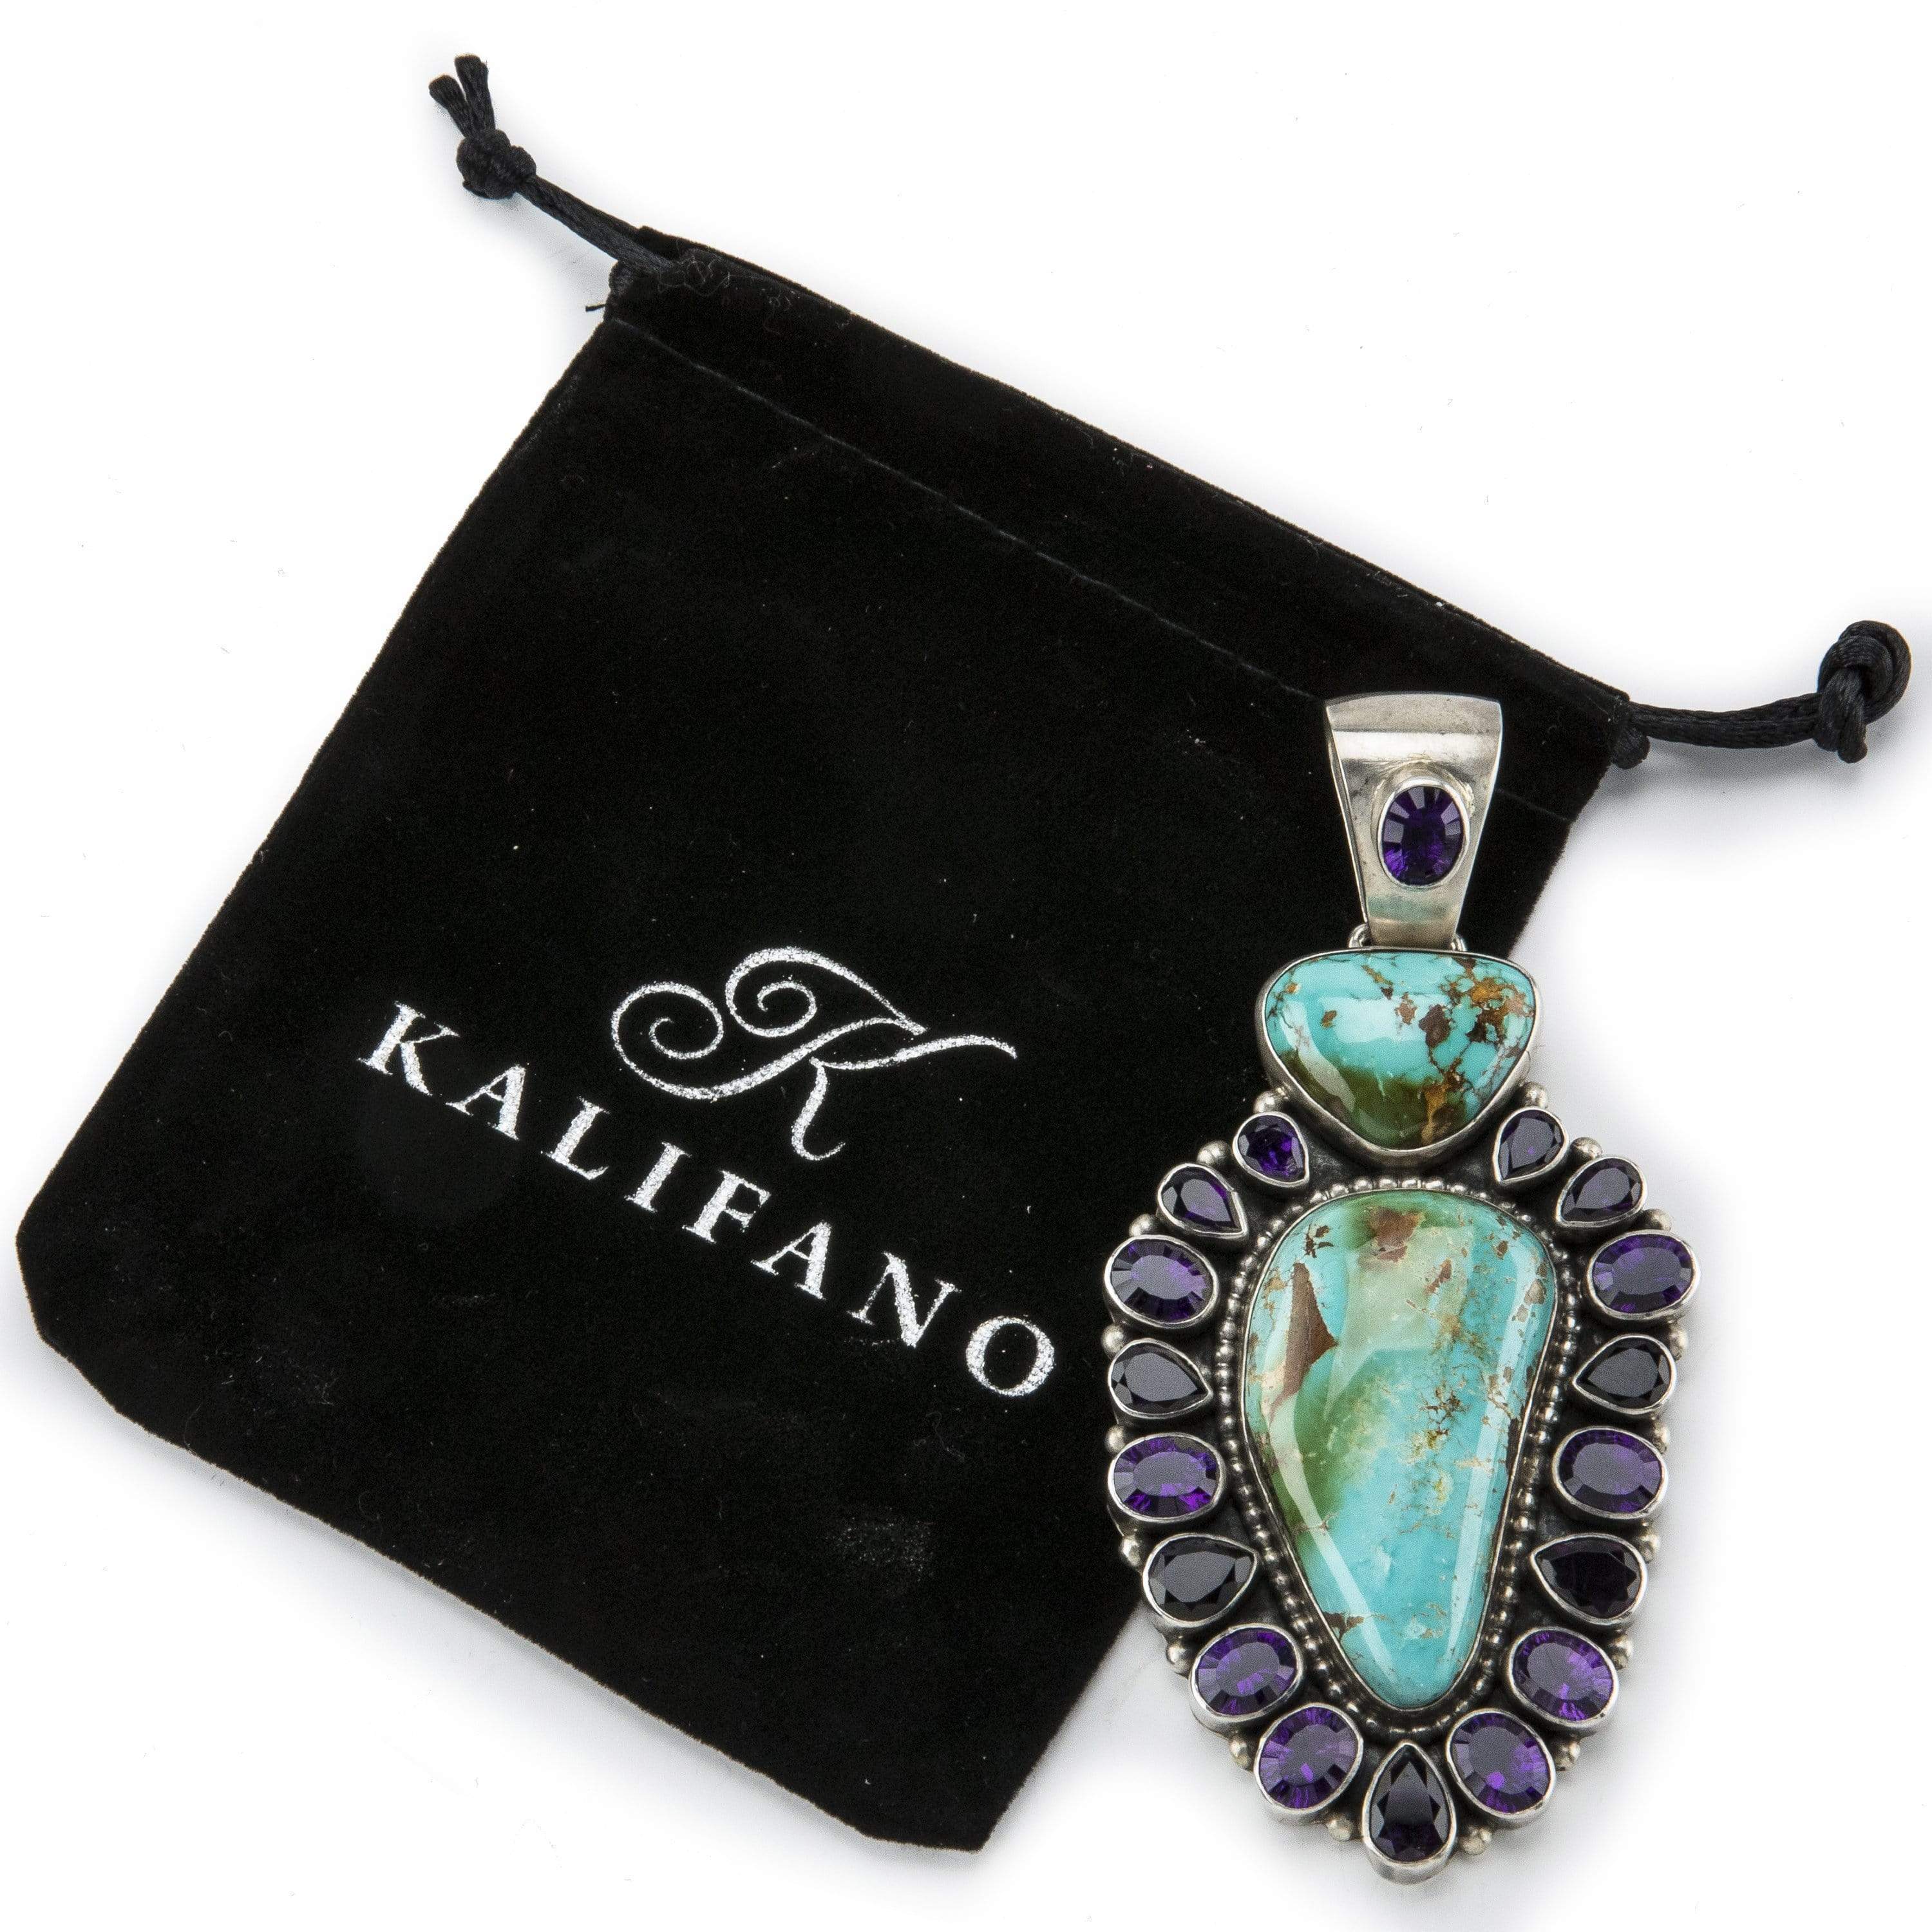 Kalifano Native American Jewelry Royston Turquoise USA Native American Made 925 Sterling Silver Pendant NAN6000.002